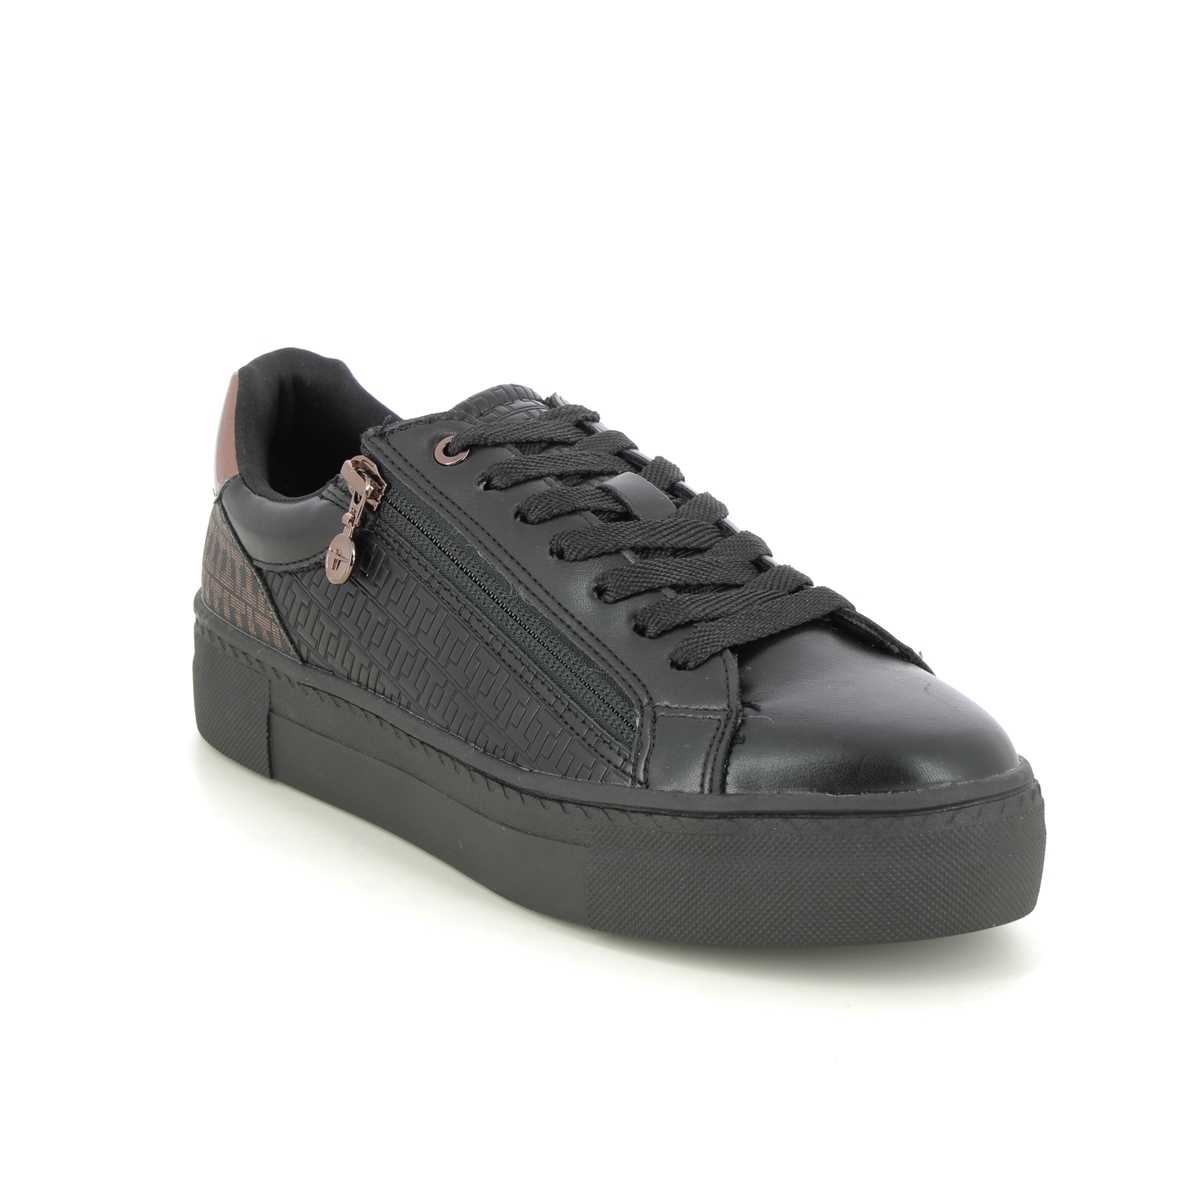 Tamaris Lima Zip Black Womens trainers 23313-41-096 in a Plain Man-made in Size 41